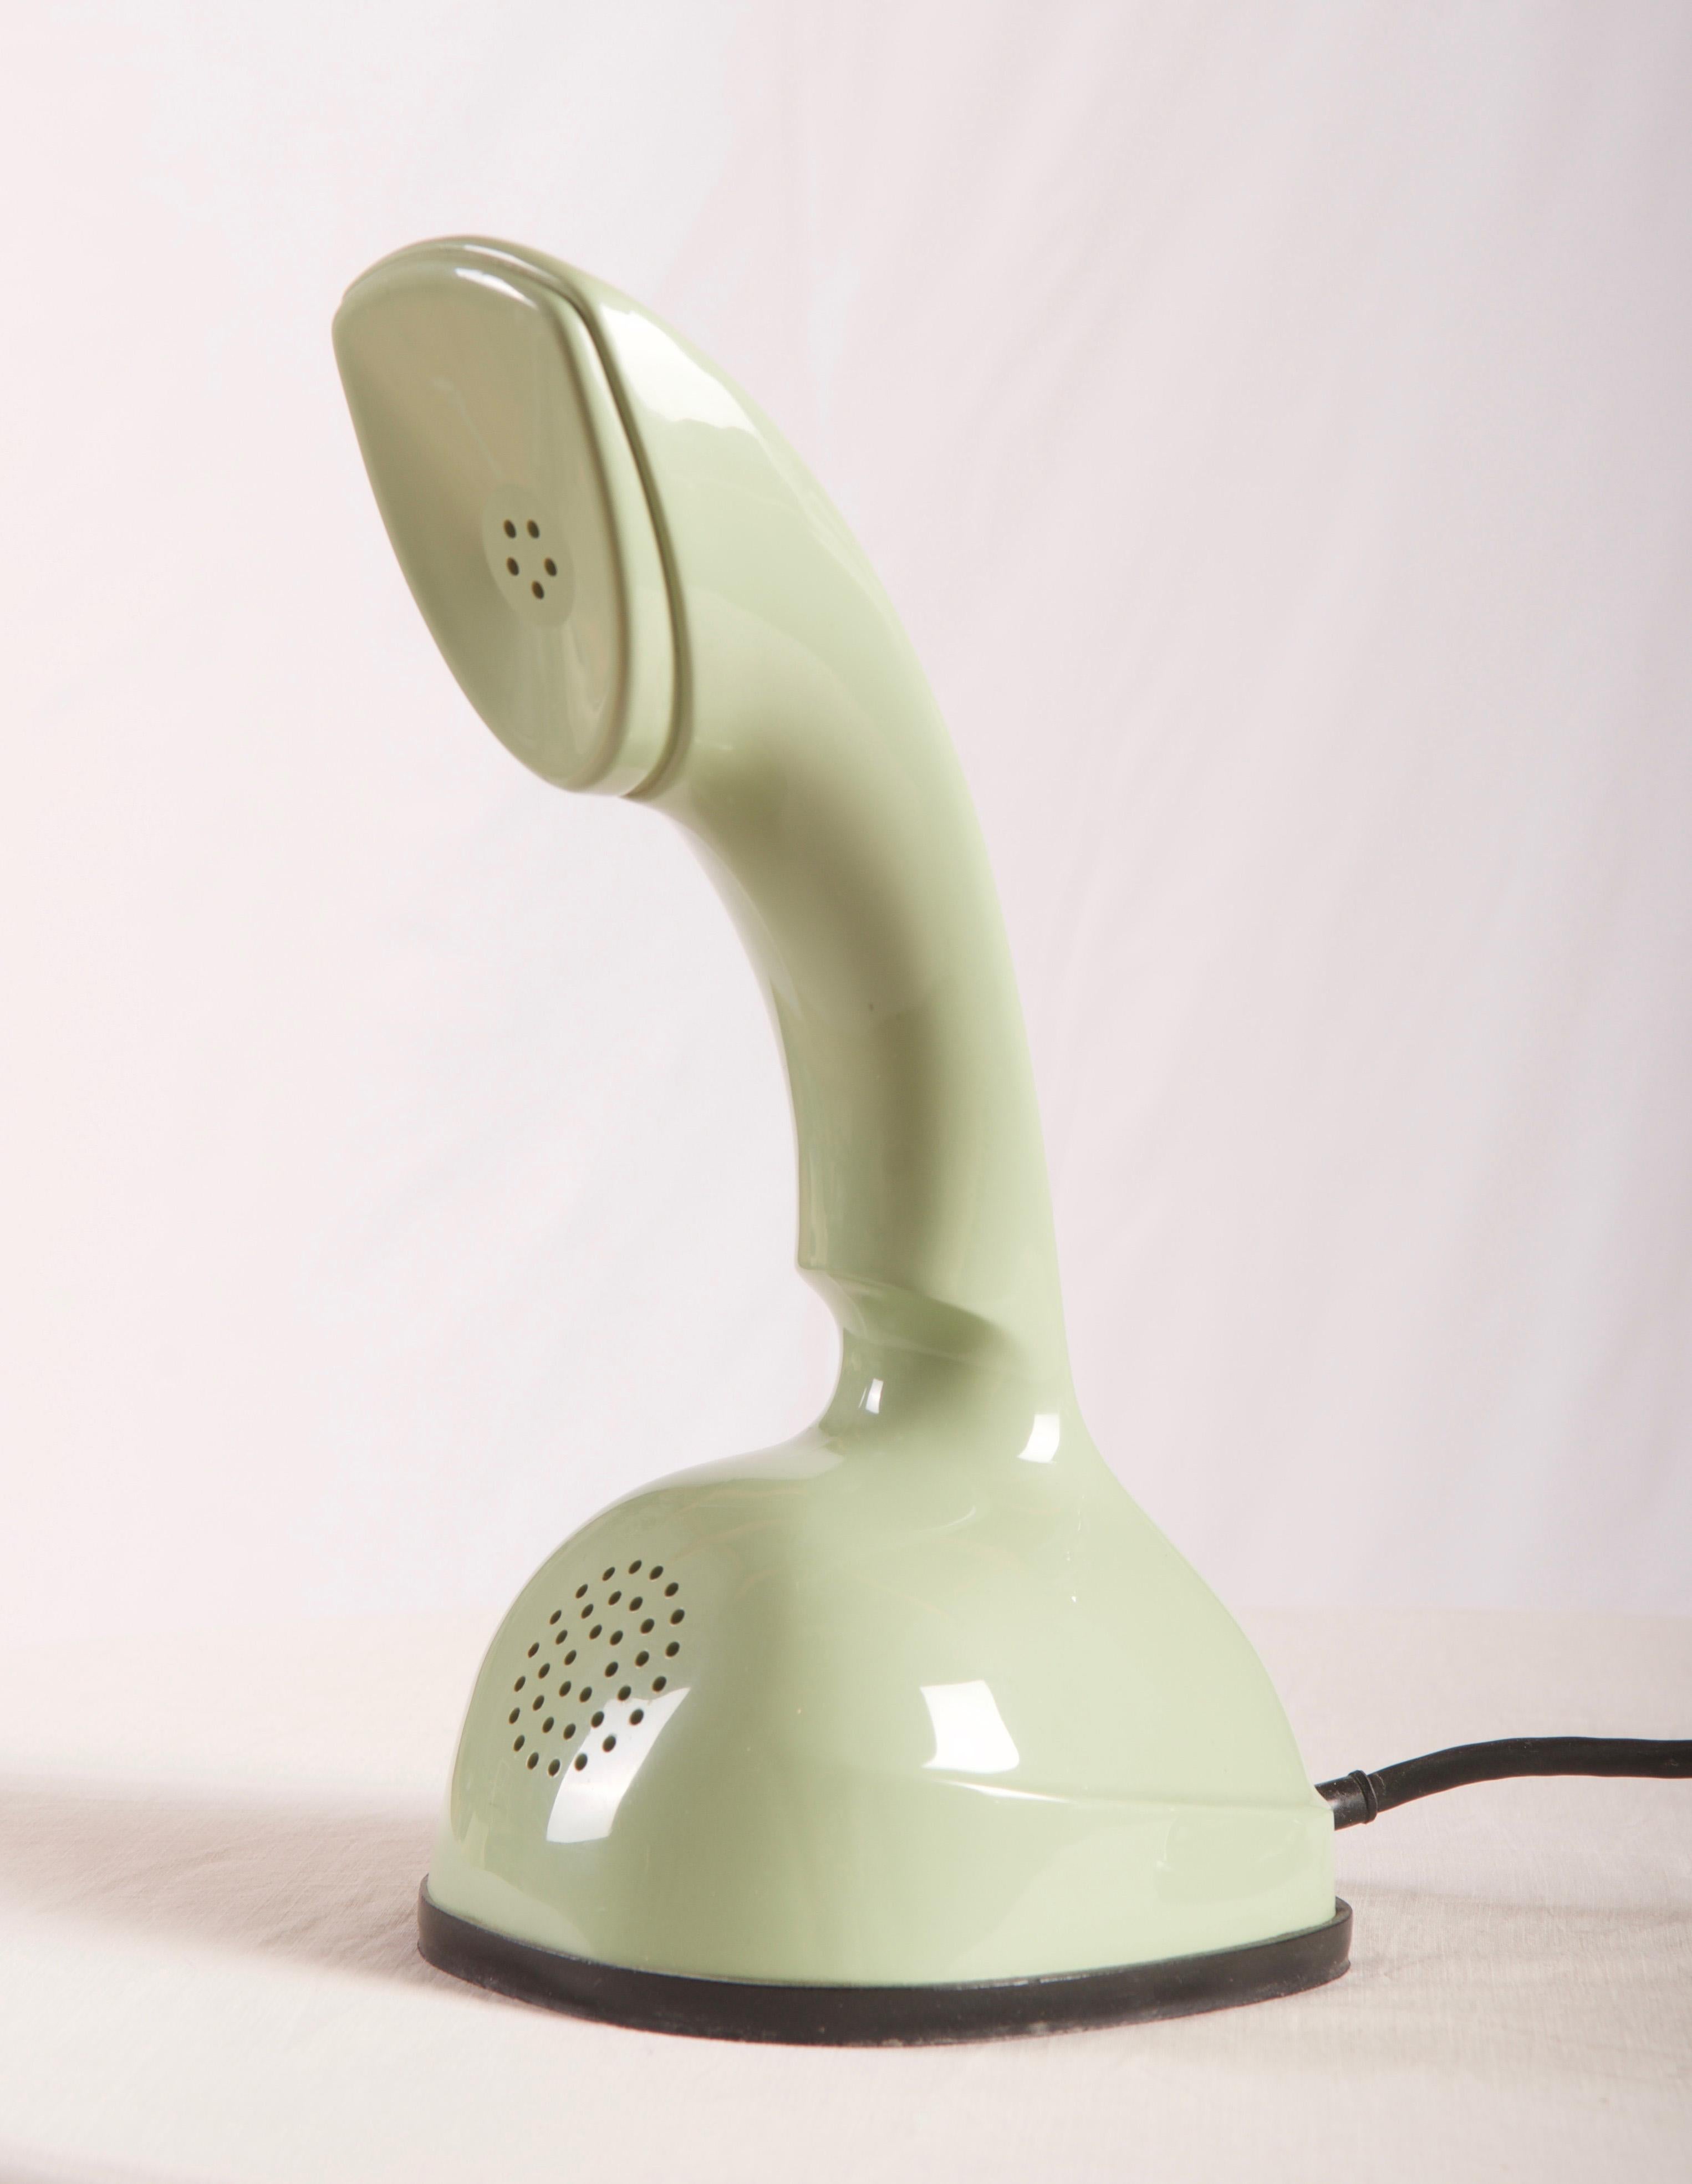 Vintage Rotary dial green ericofone. This is the model Cobra. It is made of thermoplastic ABS
Designed in the 1950s in Sweden by Hugo Blomberg, Ralph Lysell and Gösta Thames, LM Ericsson.
 